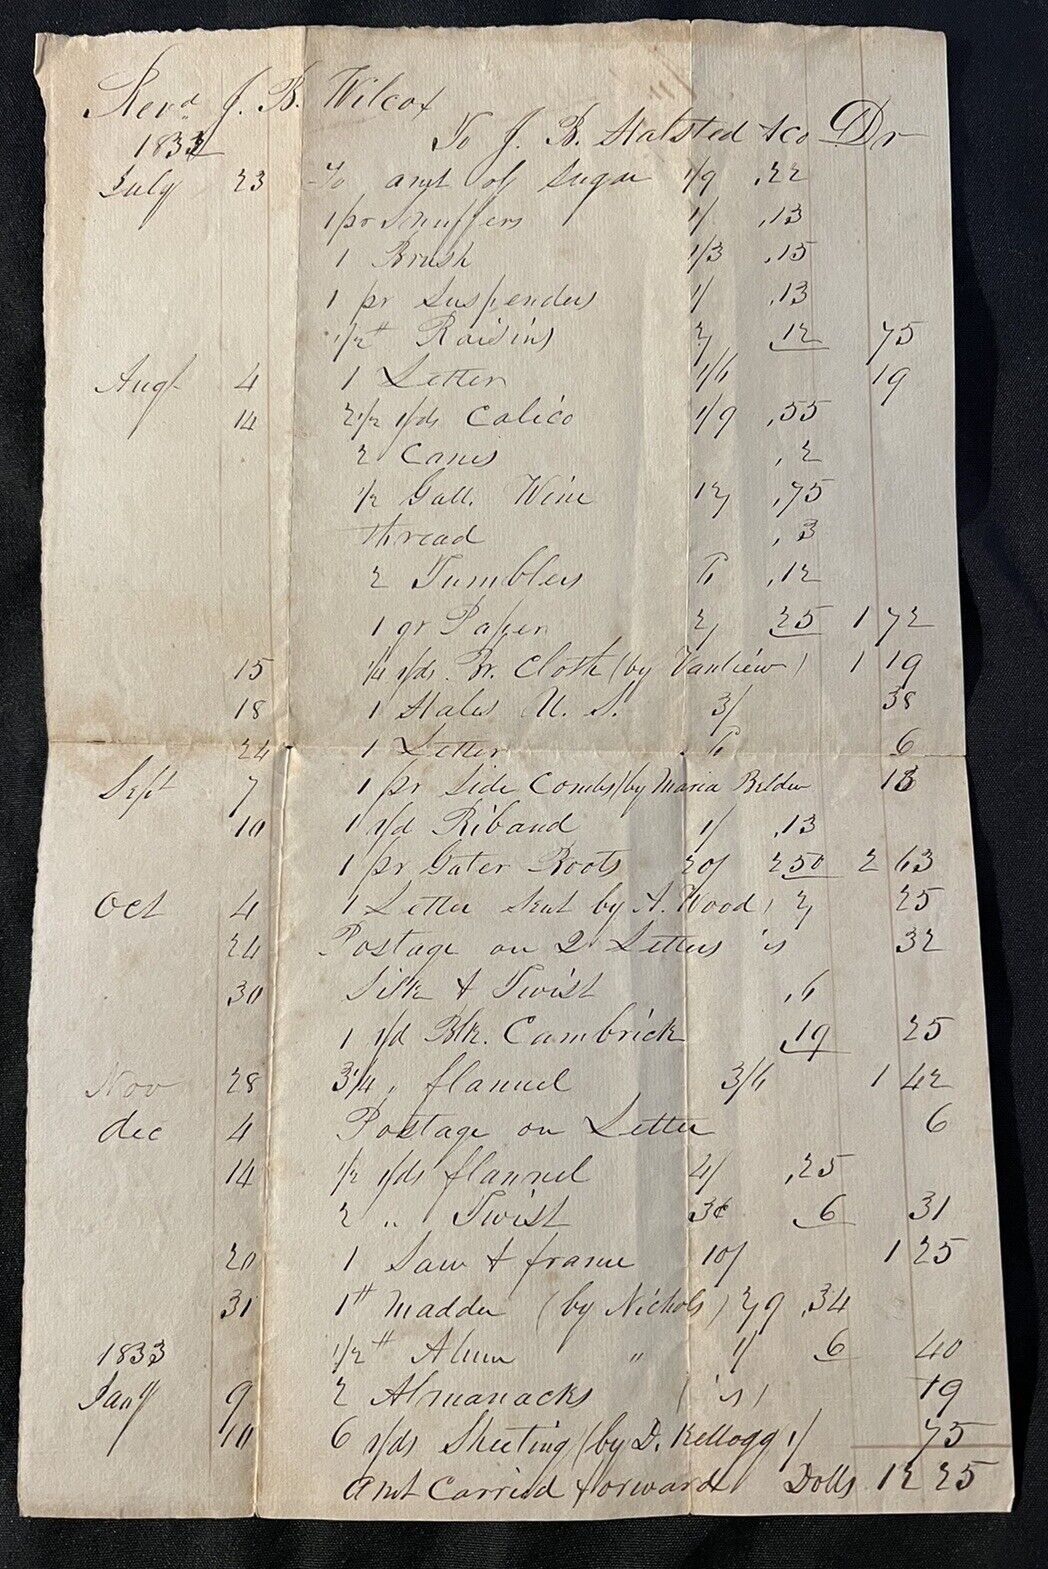 1832 Reverend J.B. Wilcox GENERAL STORE Ledger Page to J.B. Halsted & Co